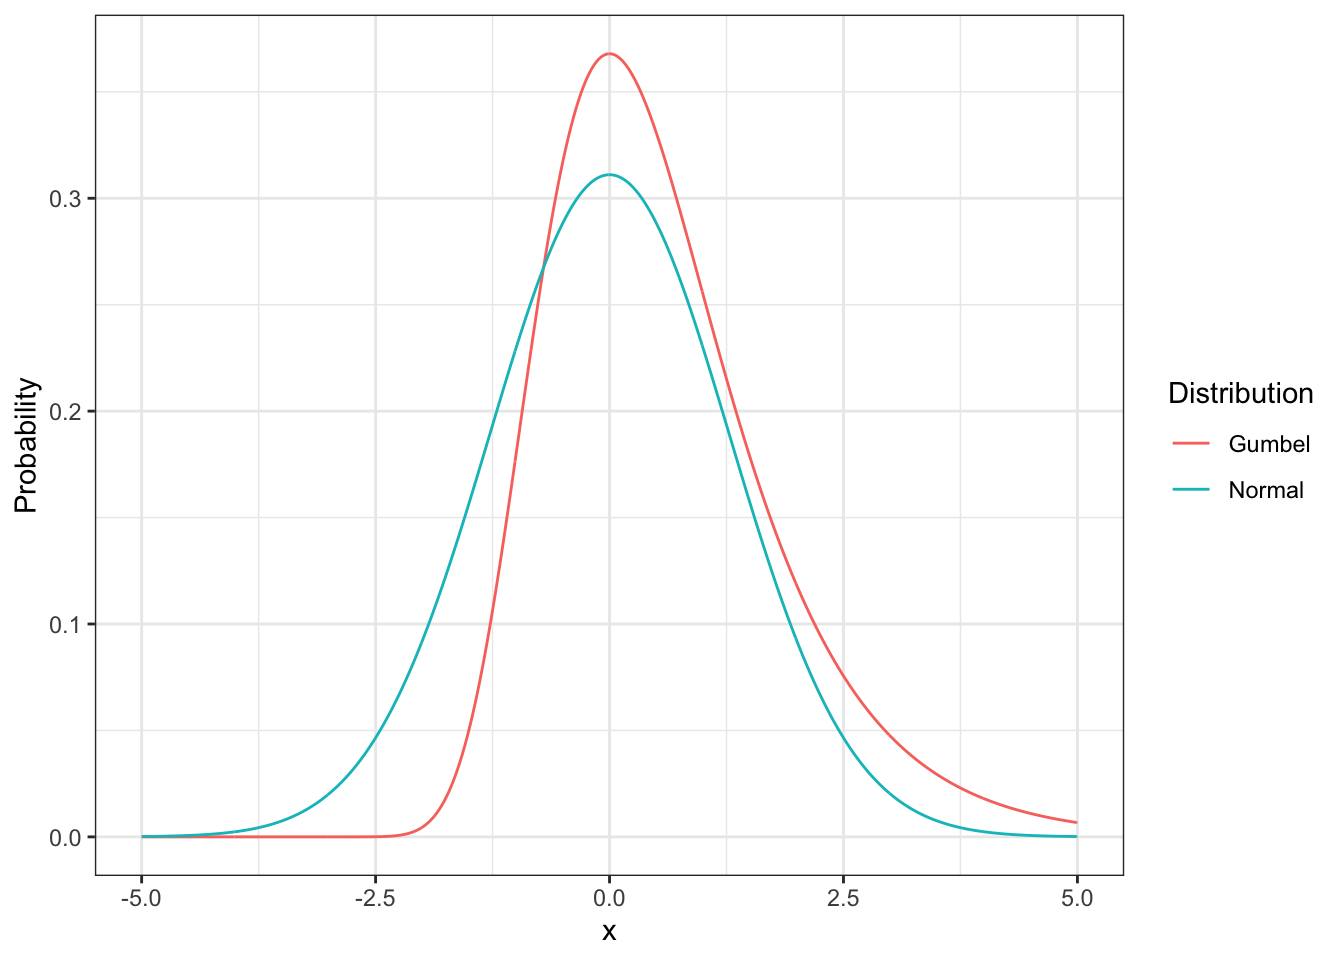 Probability density function for normal and Gumbel distributions.